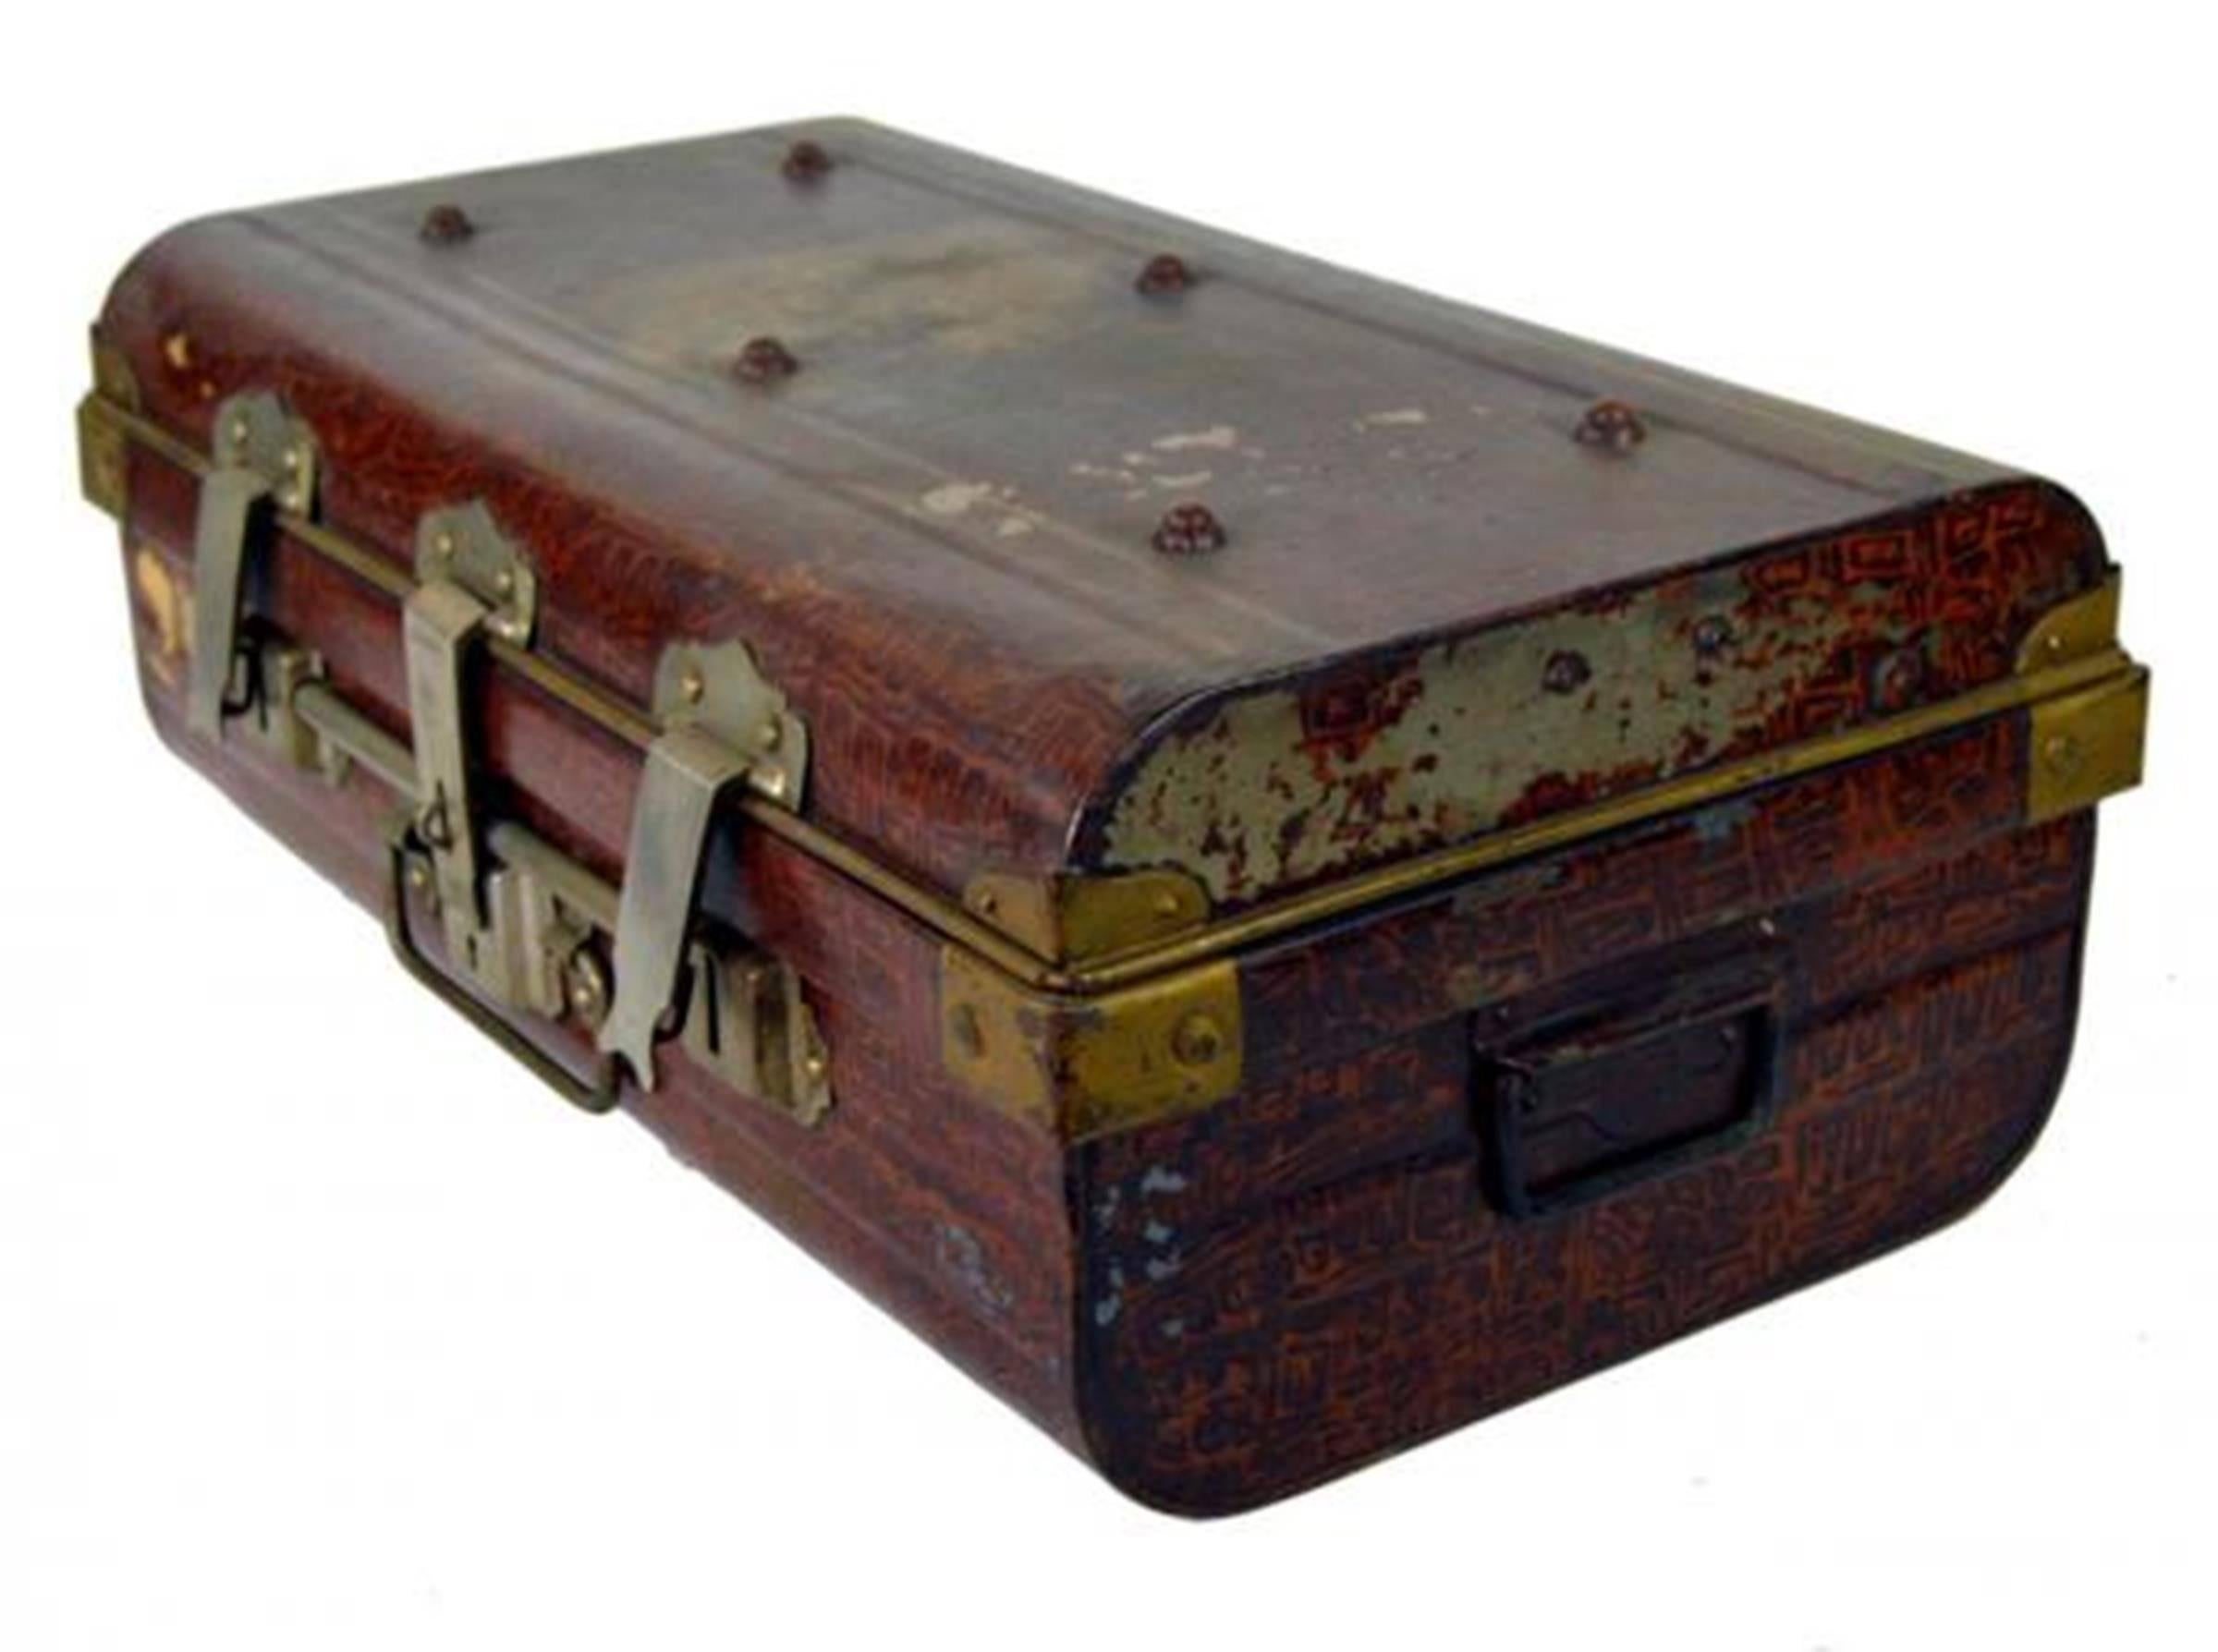 A 19th century locked metal trunk made for export by the British firm Wilkes & Son. This rectangular trunk was made in metal and painted like a red leather reproduction. Gilt hardware reinforces the corners while a three piece metal lockset secures